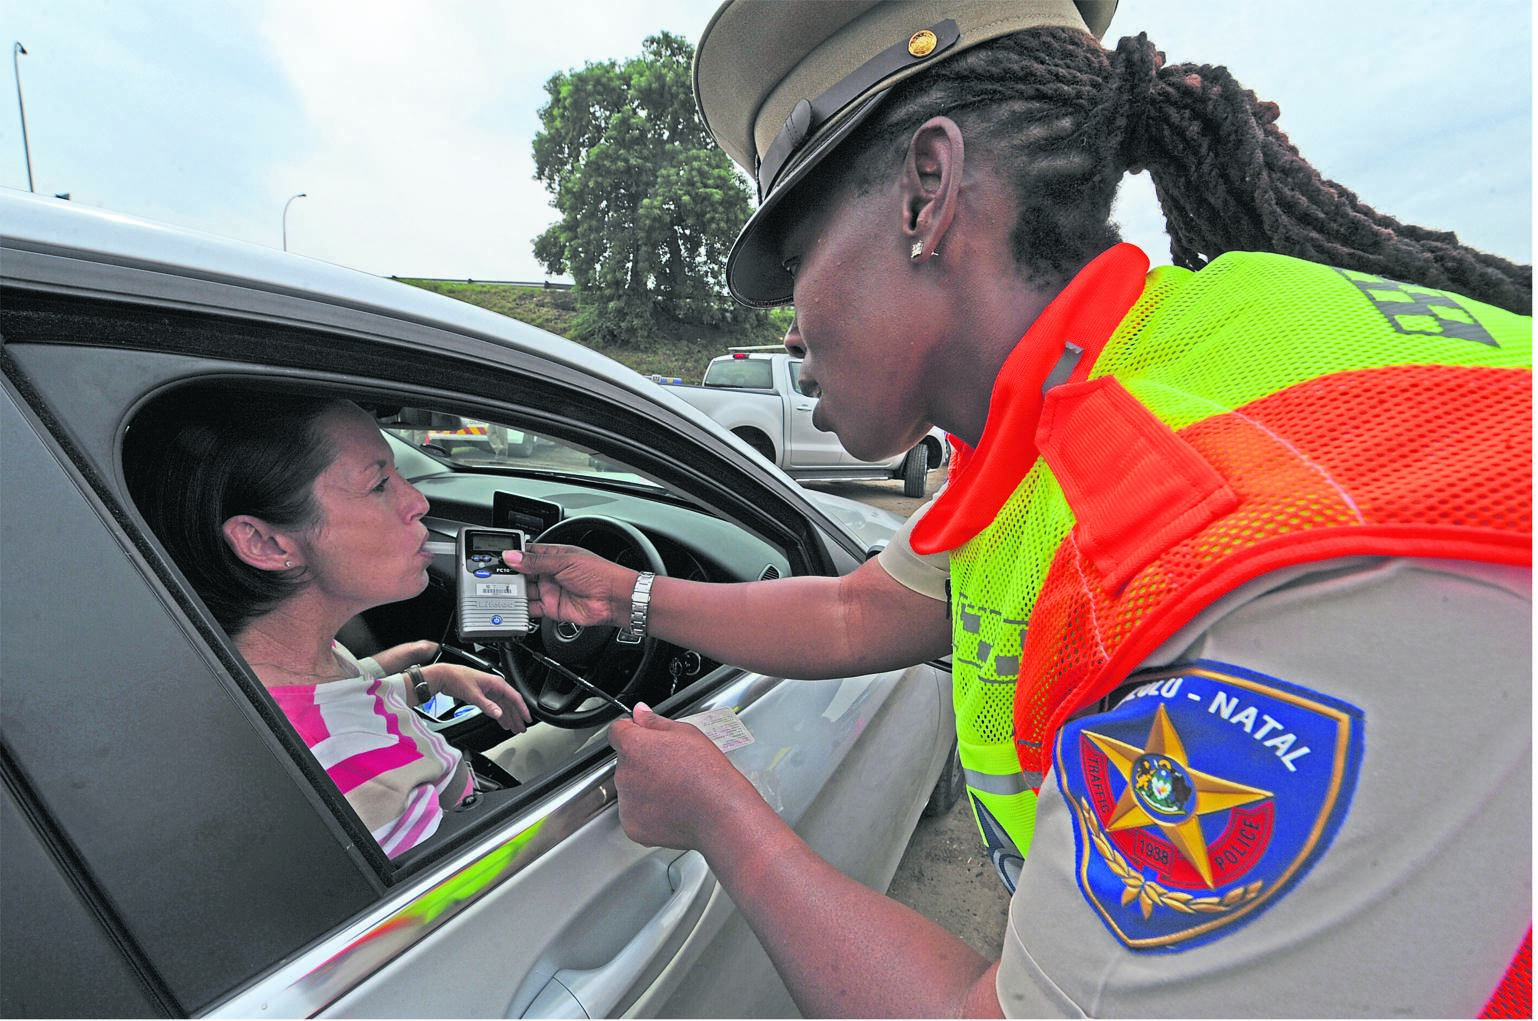 A motorist being checked for alcohol levels. (File photo)